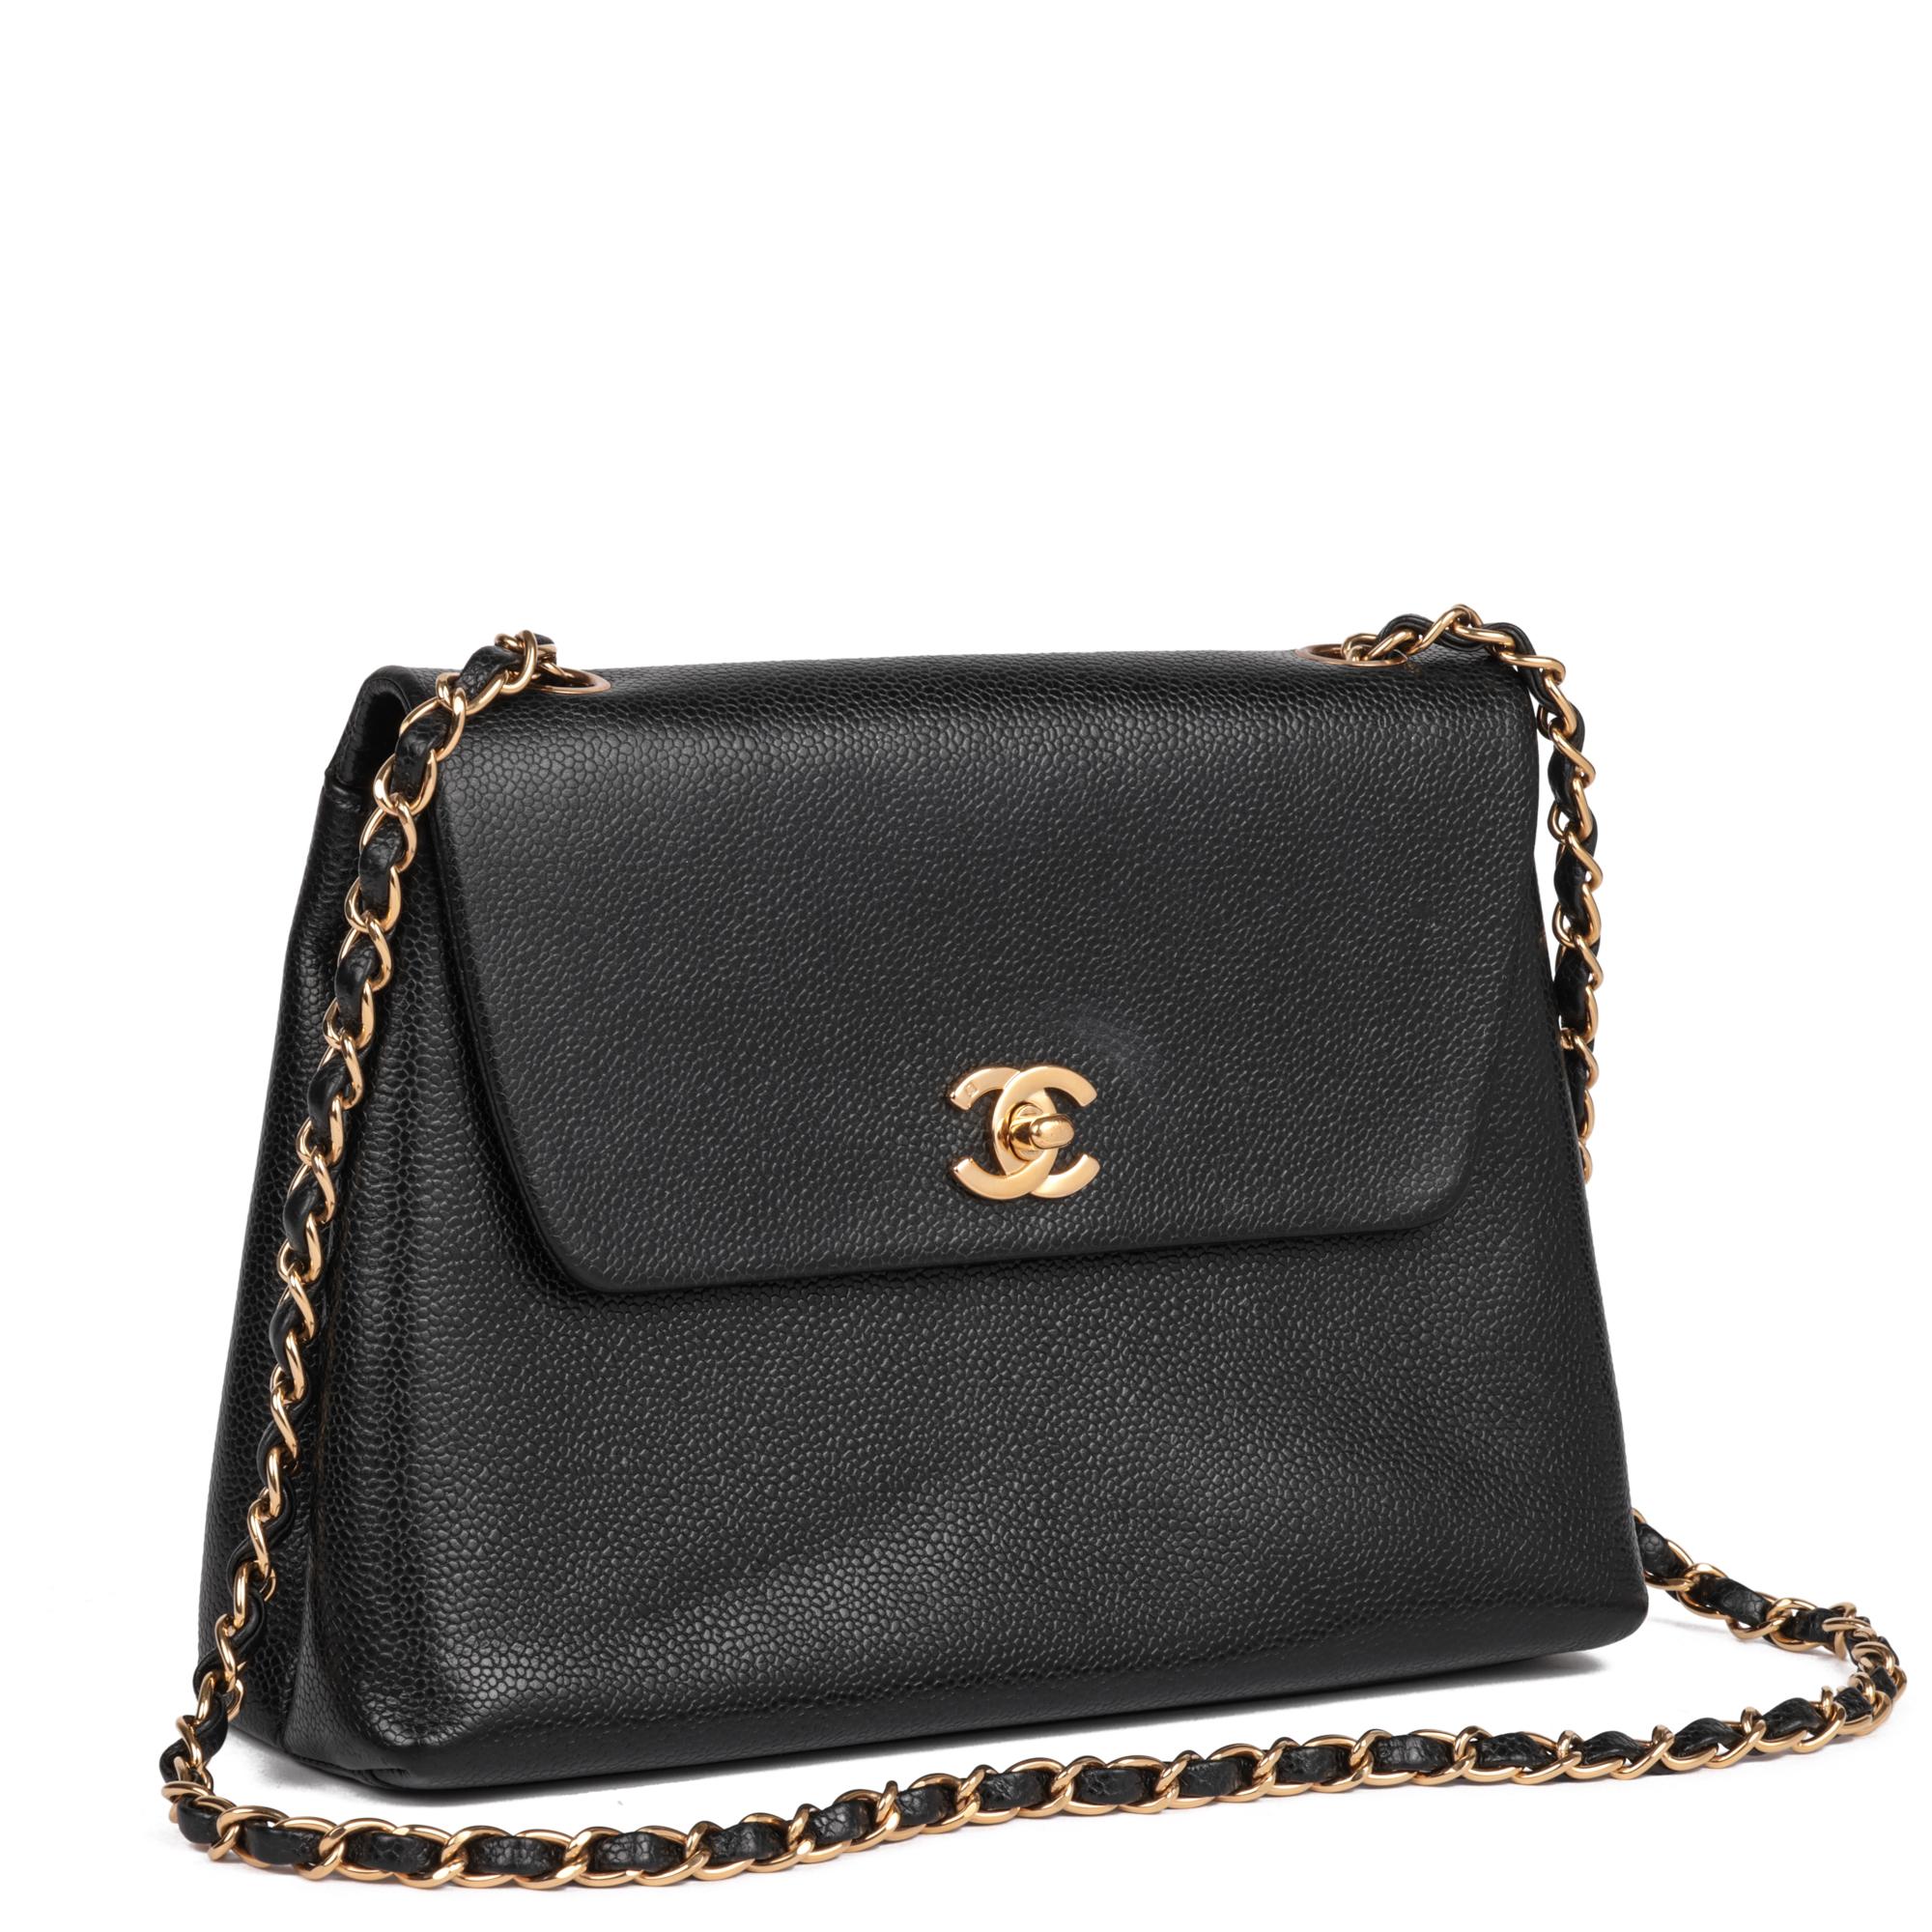 CHANEL
Black Caviar Leather Vintage Medium Classic Single Flap Bag

Xupes Reference: HB5181
Serial Number: 5423490
Age (Circa): 1997
Accompanied By: Chanel Dust Bag, Care Booklet, Authenticity Card
Authenticity Details: Authenticity Card, Serial